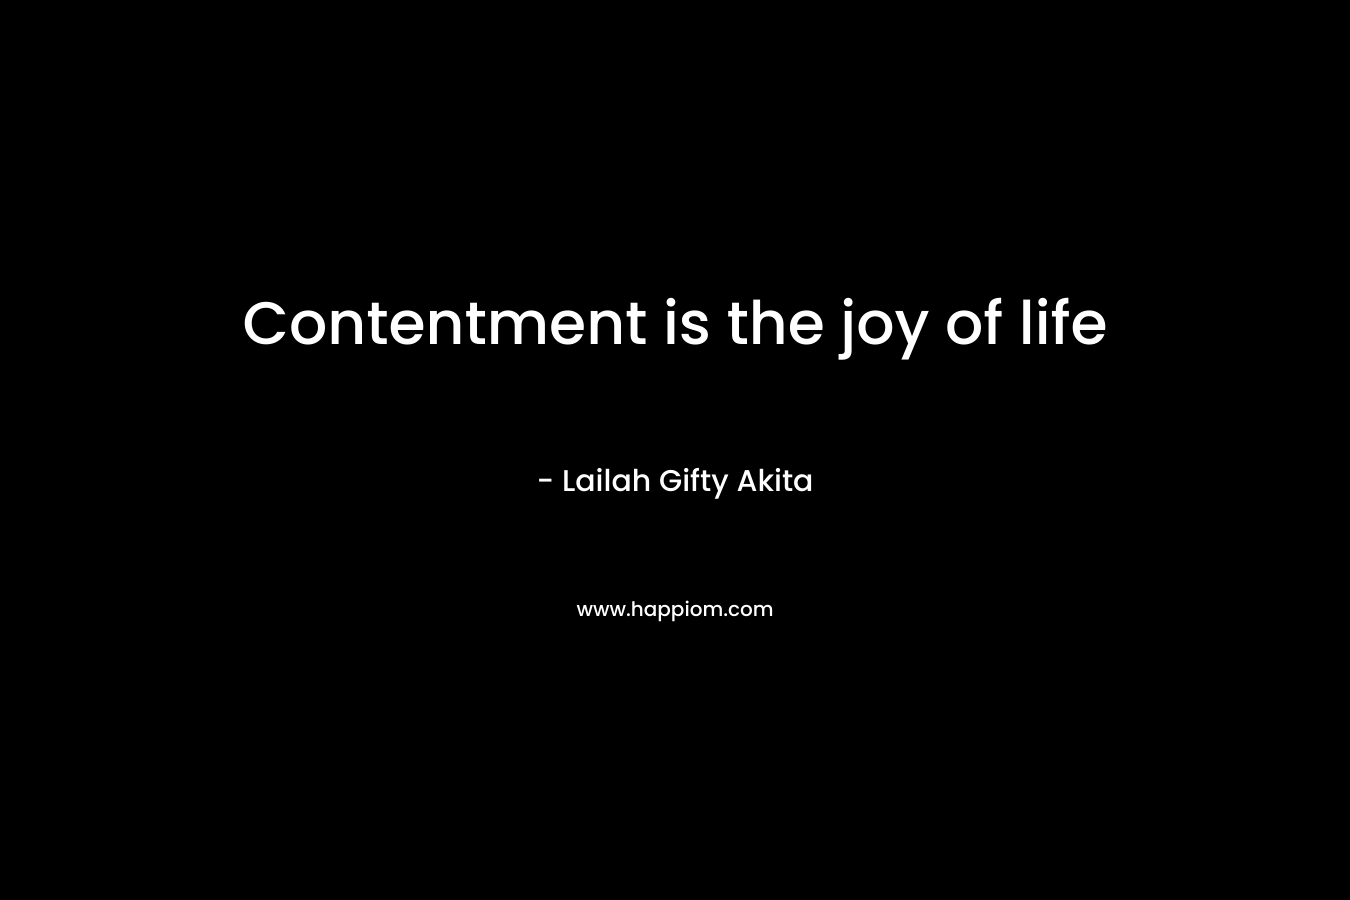 Contentment is the joy of life